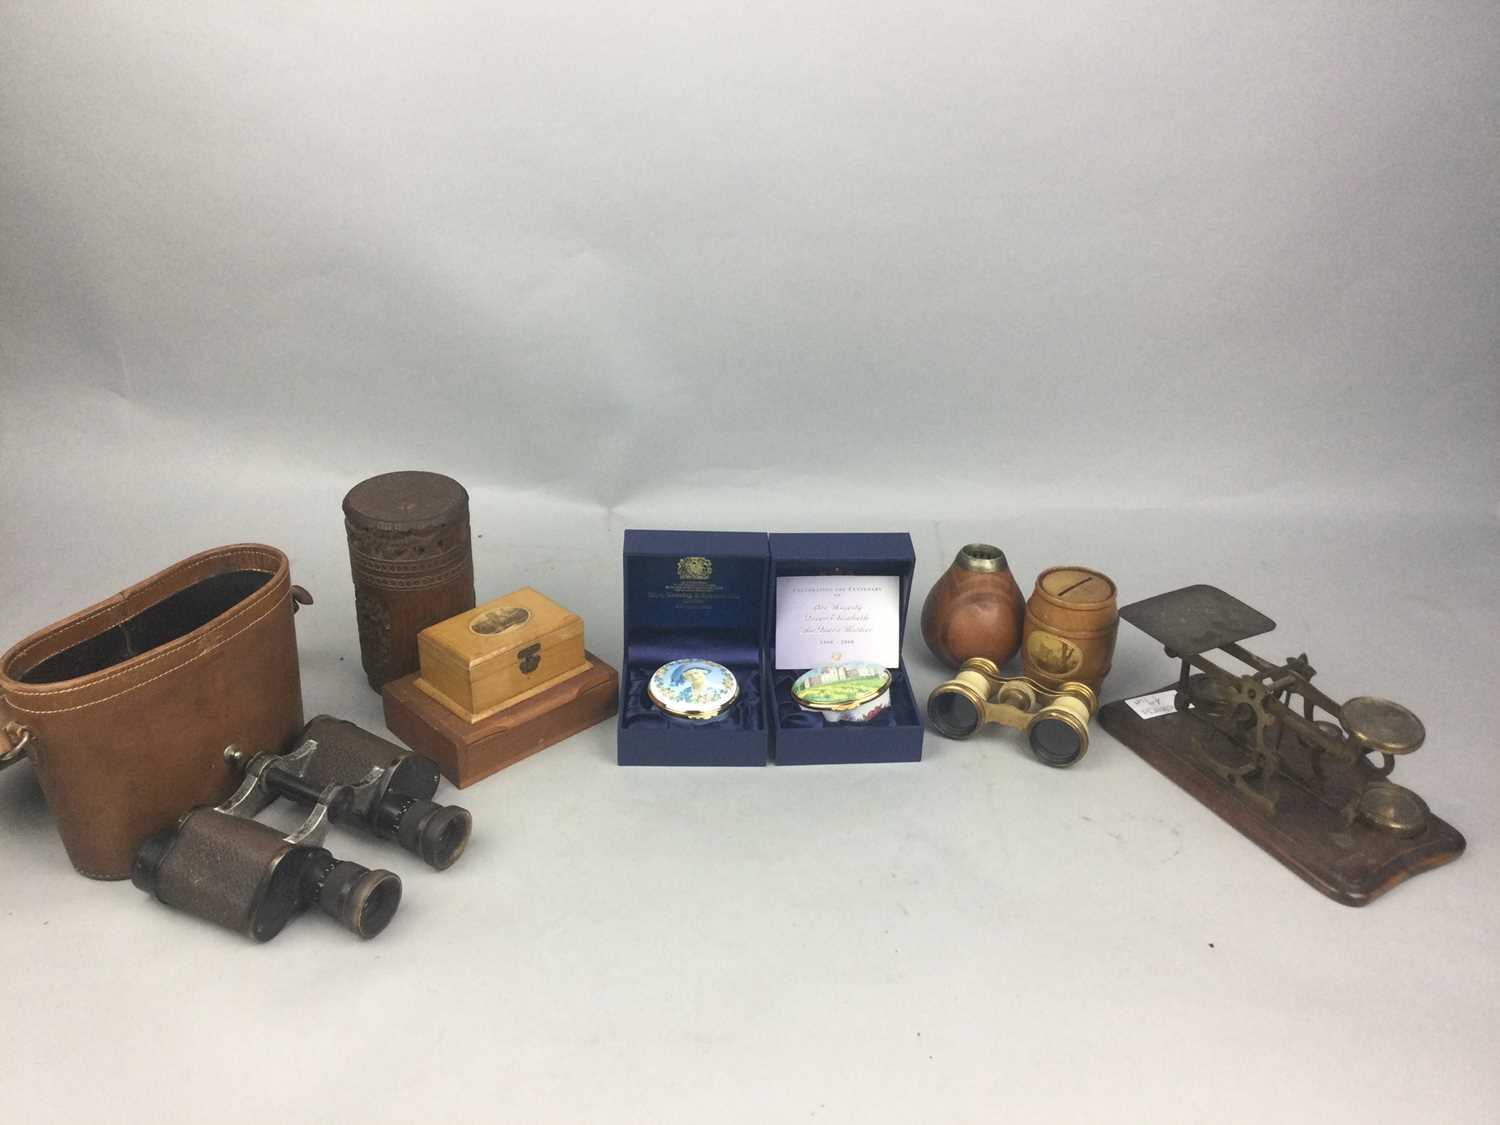 Lot 49 - A PAIR OF CARL ZEISS JENA TELACT BINOCULARS AND OTHER ITEMS